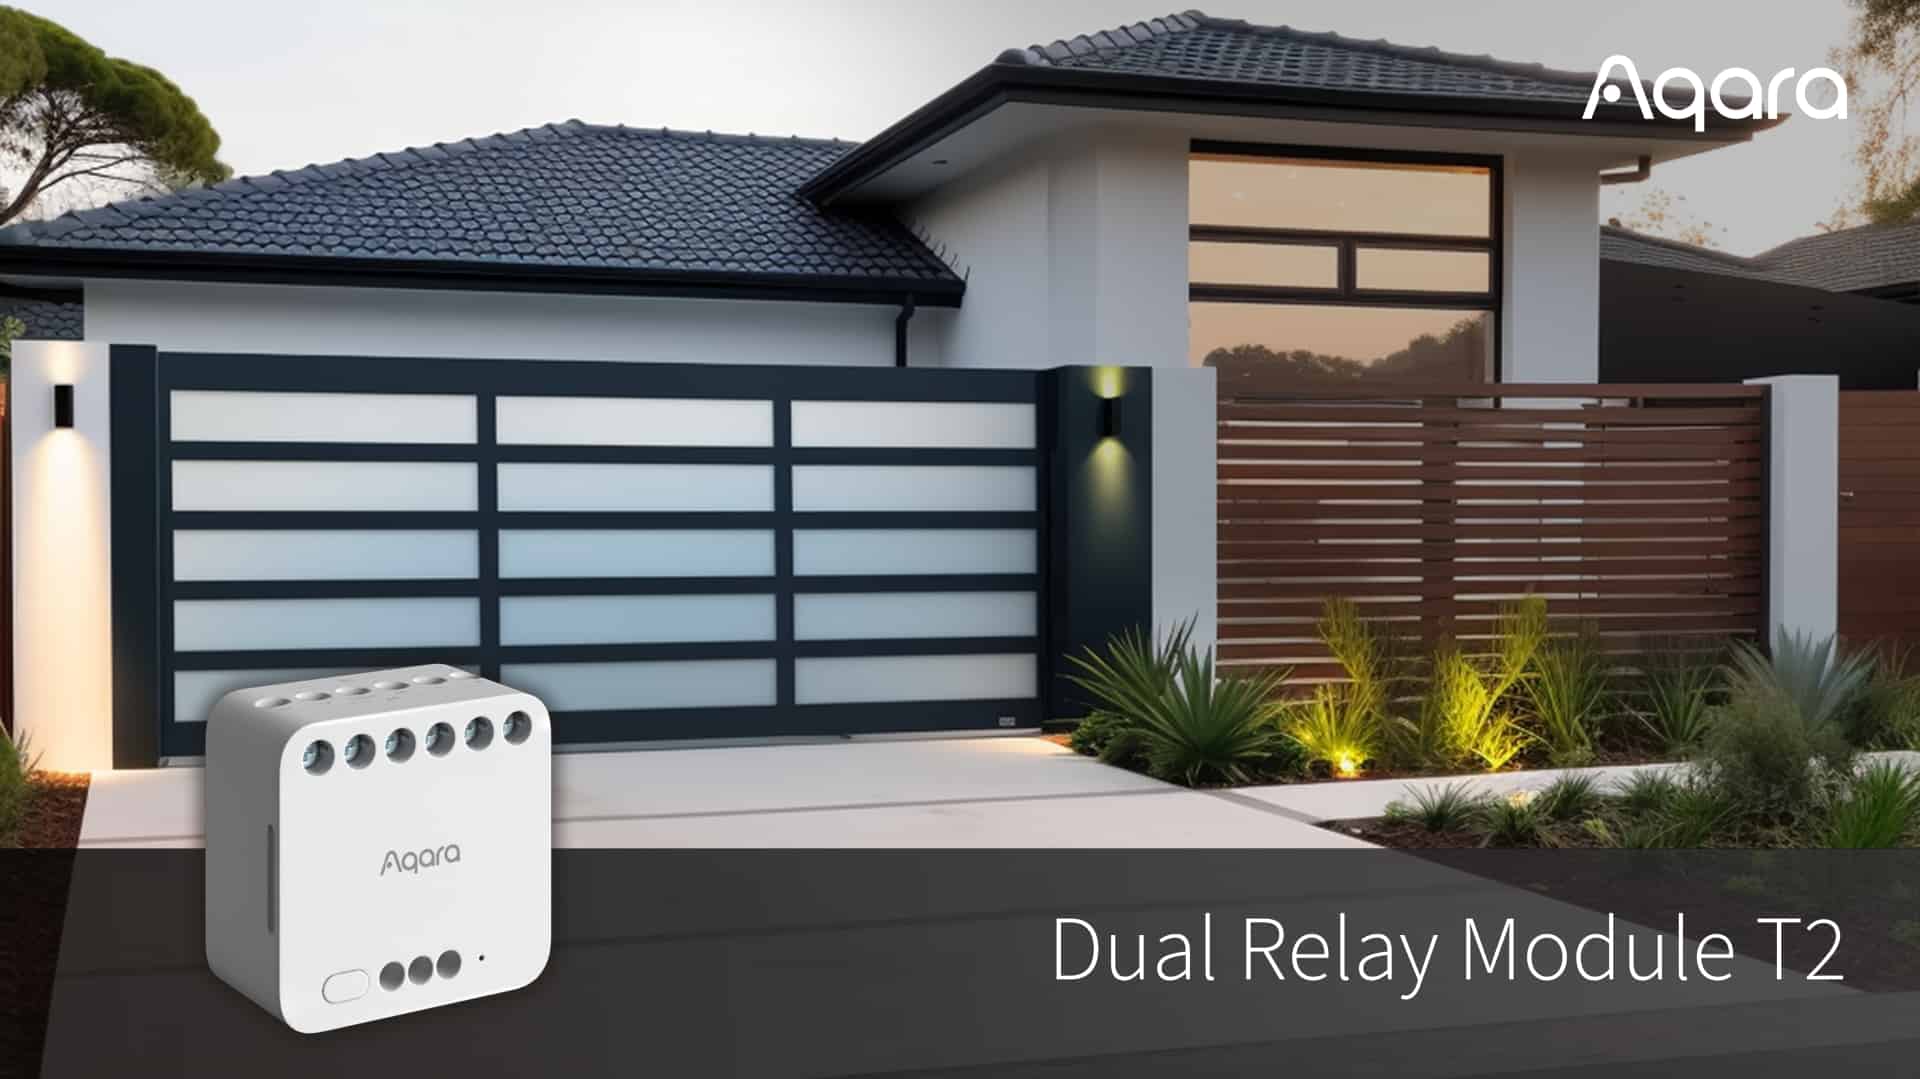 Aqara Unveils Dual Relay Module T2 with support for Matter & Apple HomeKit for £35